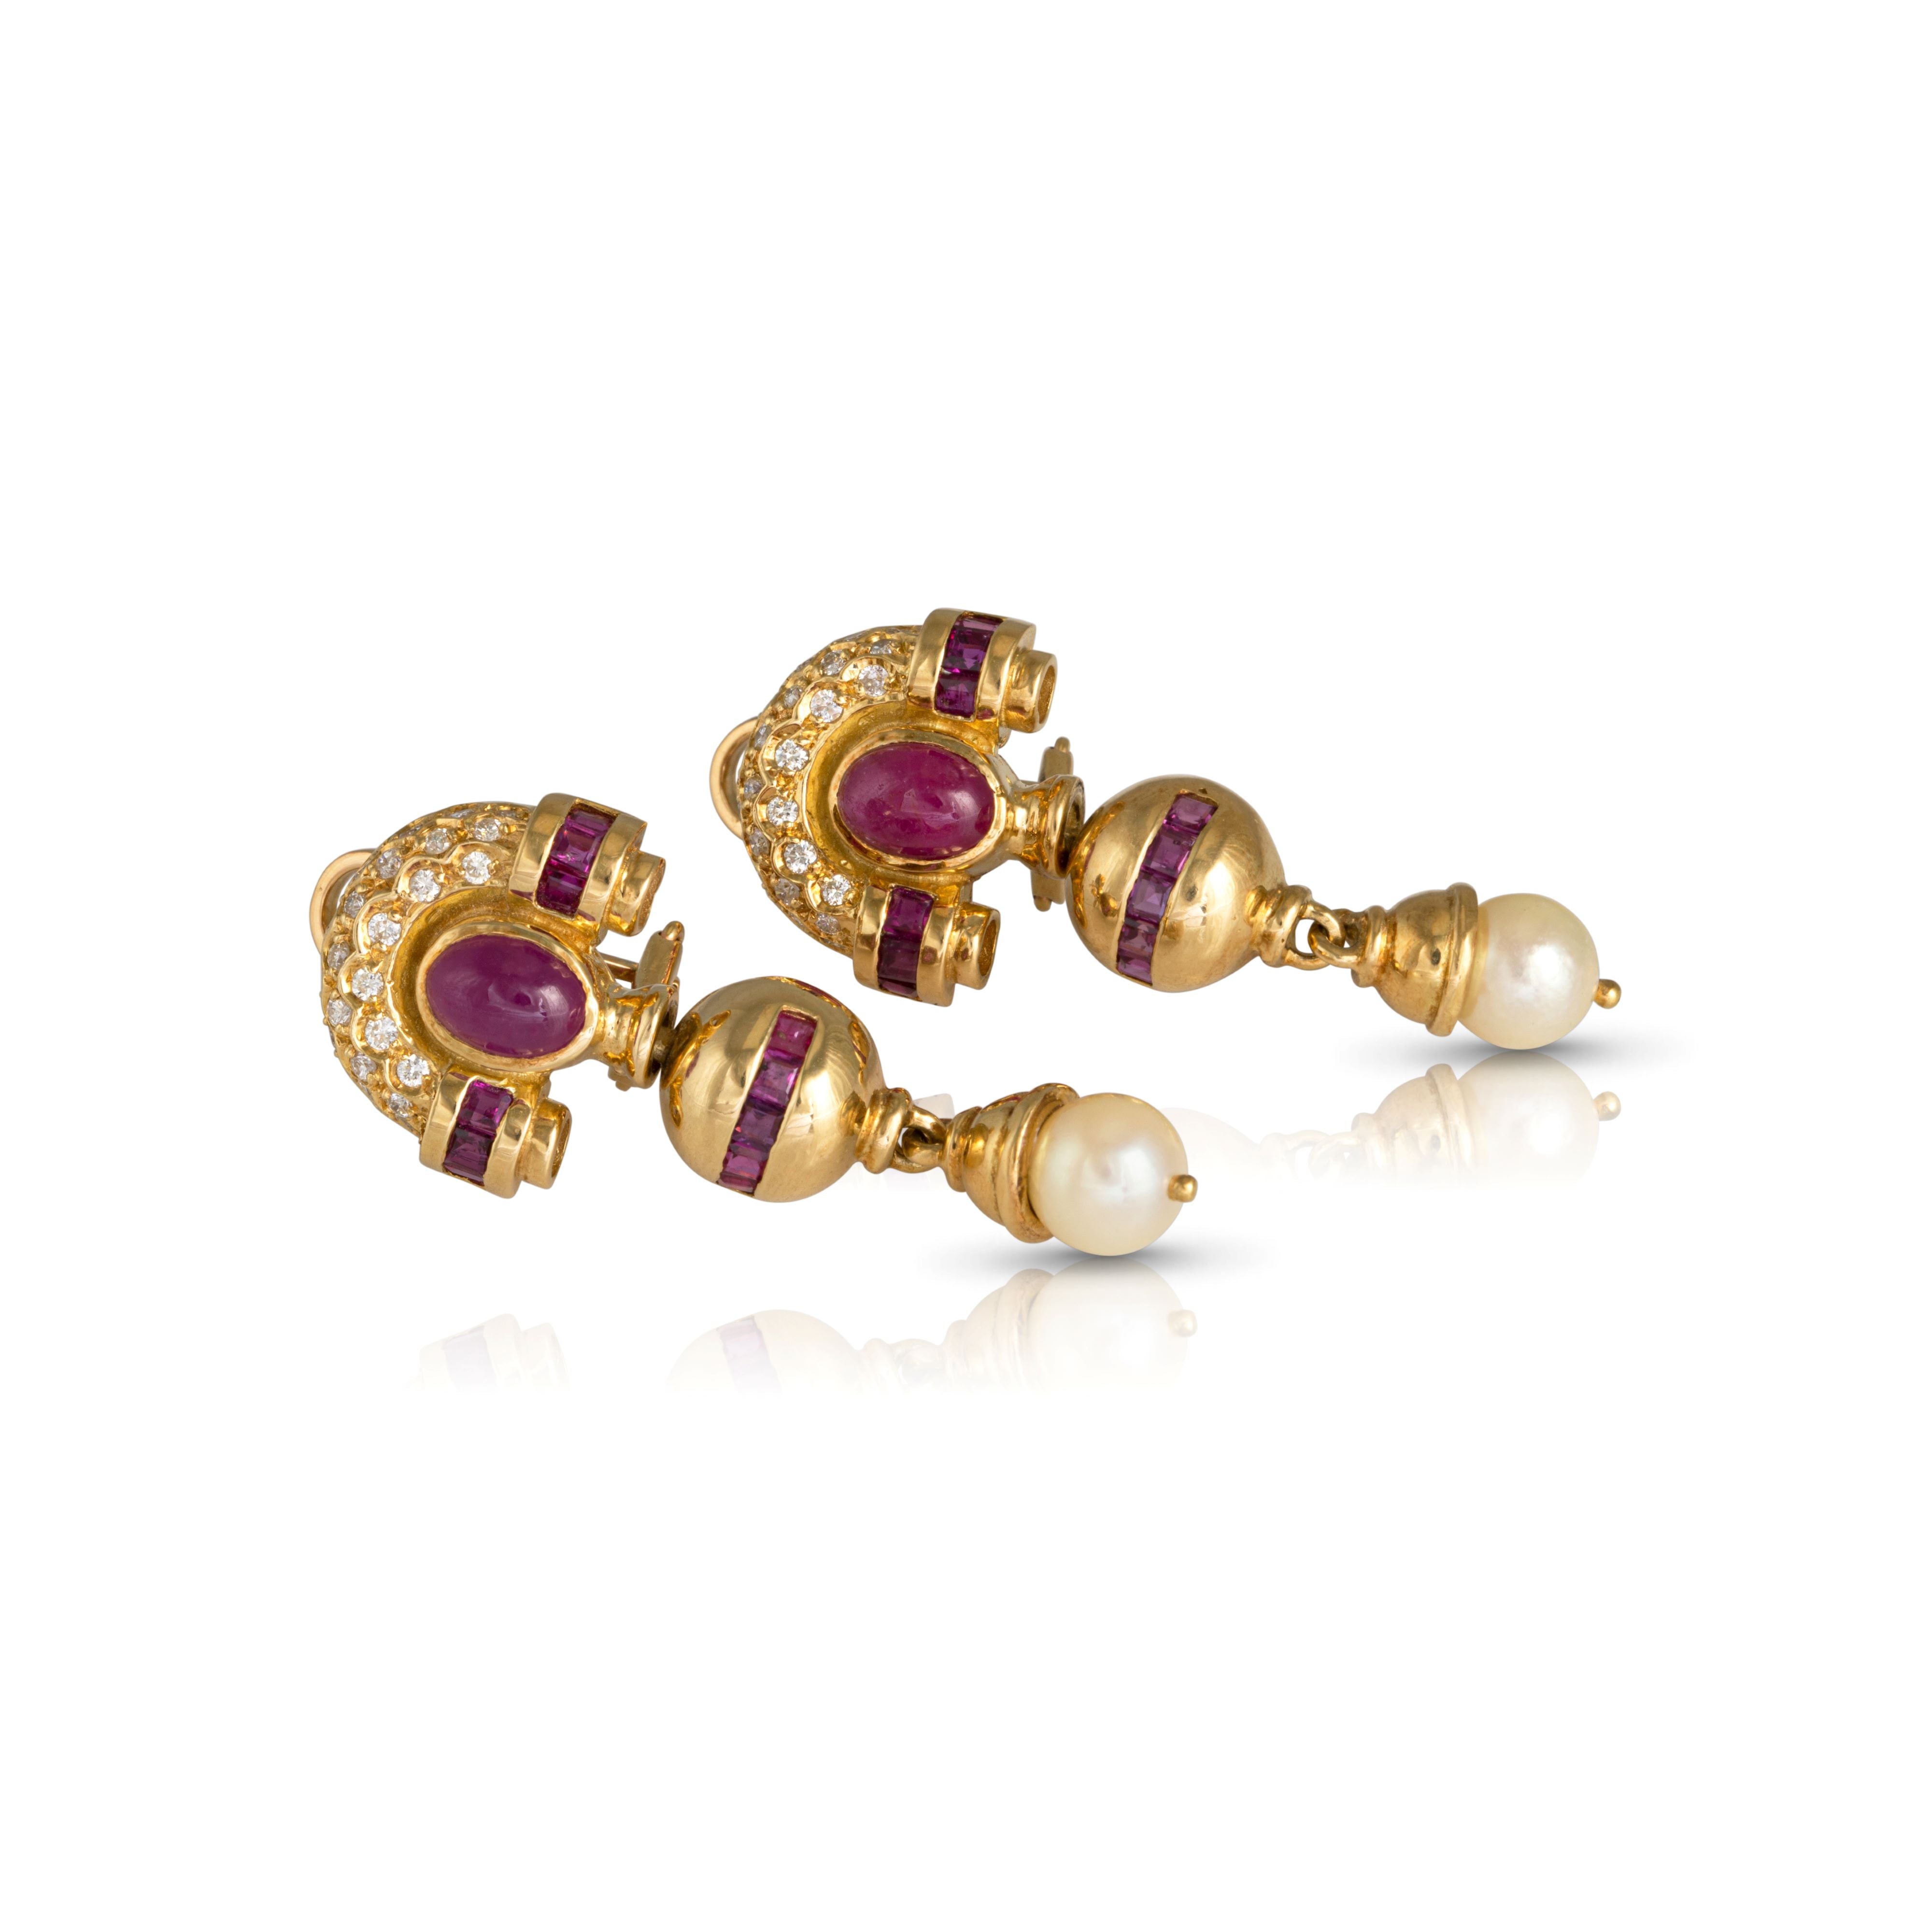 Diamond and ruby earrings in 18ct gold with pearl drops. 